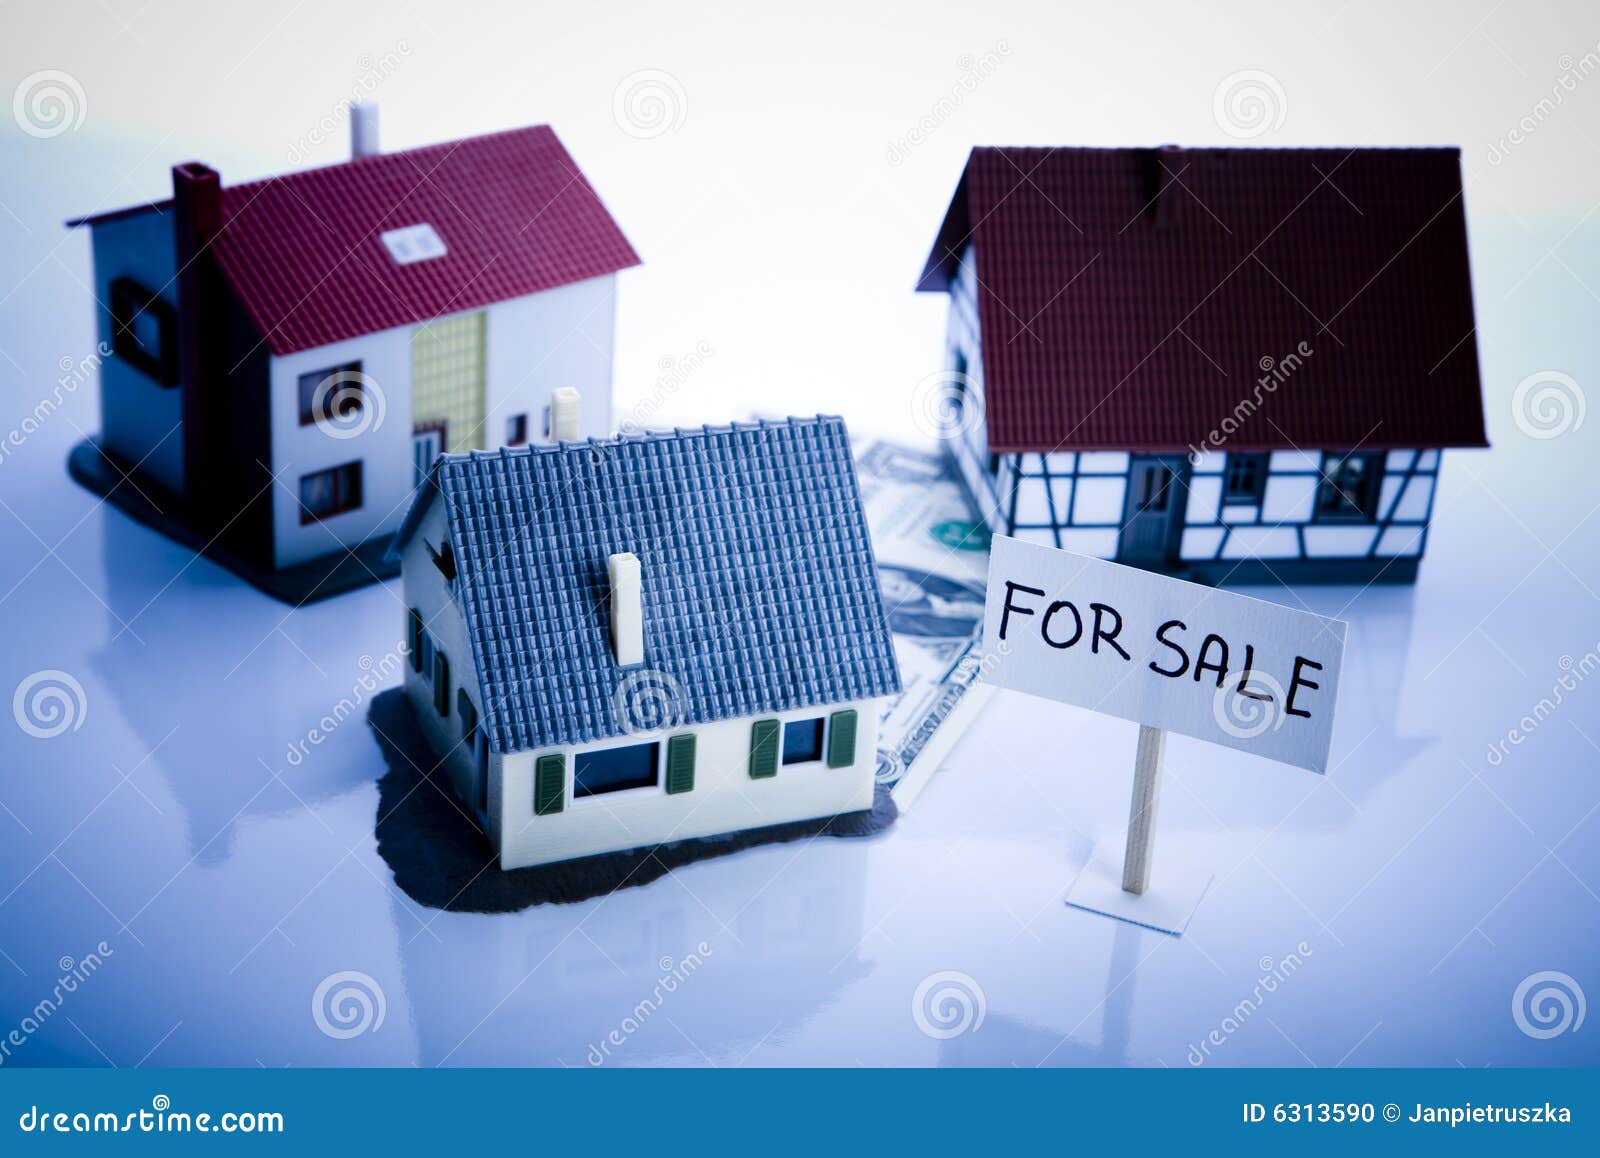 small houses for sale